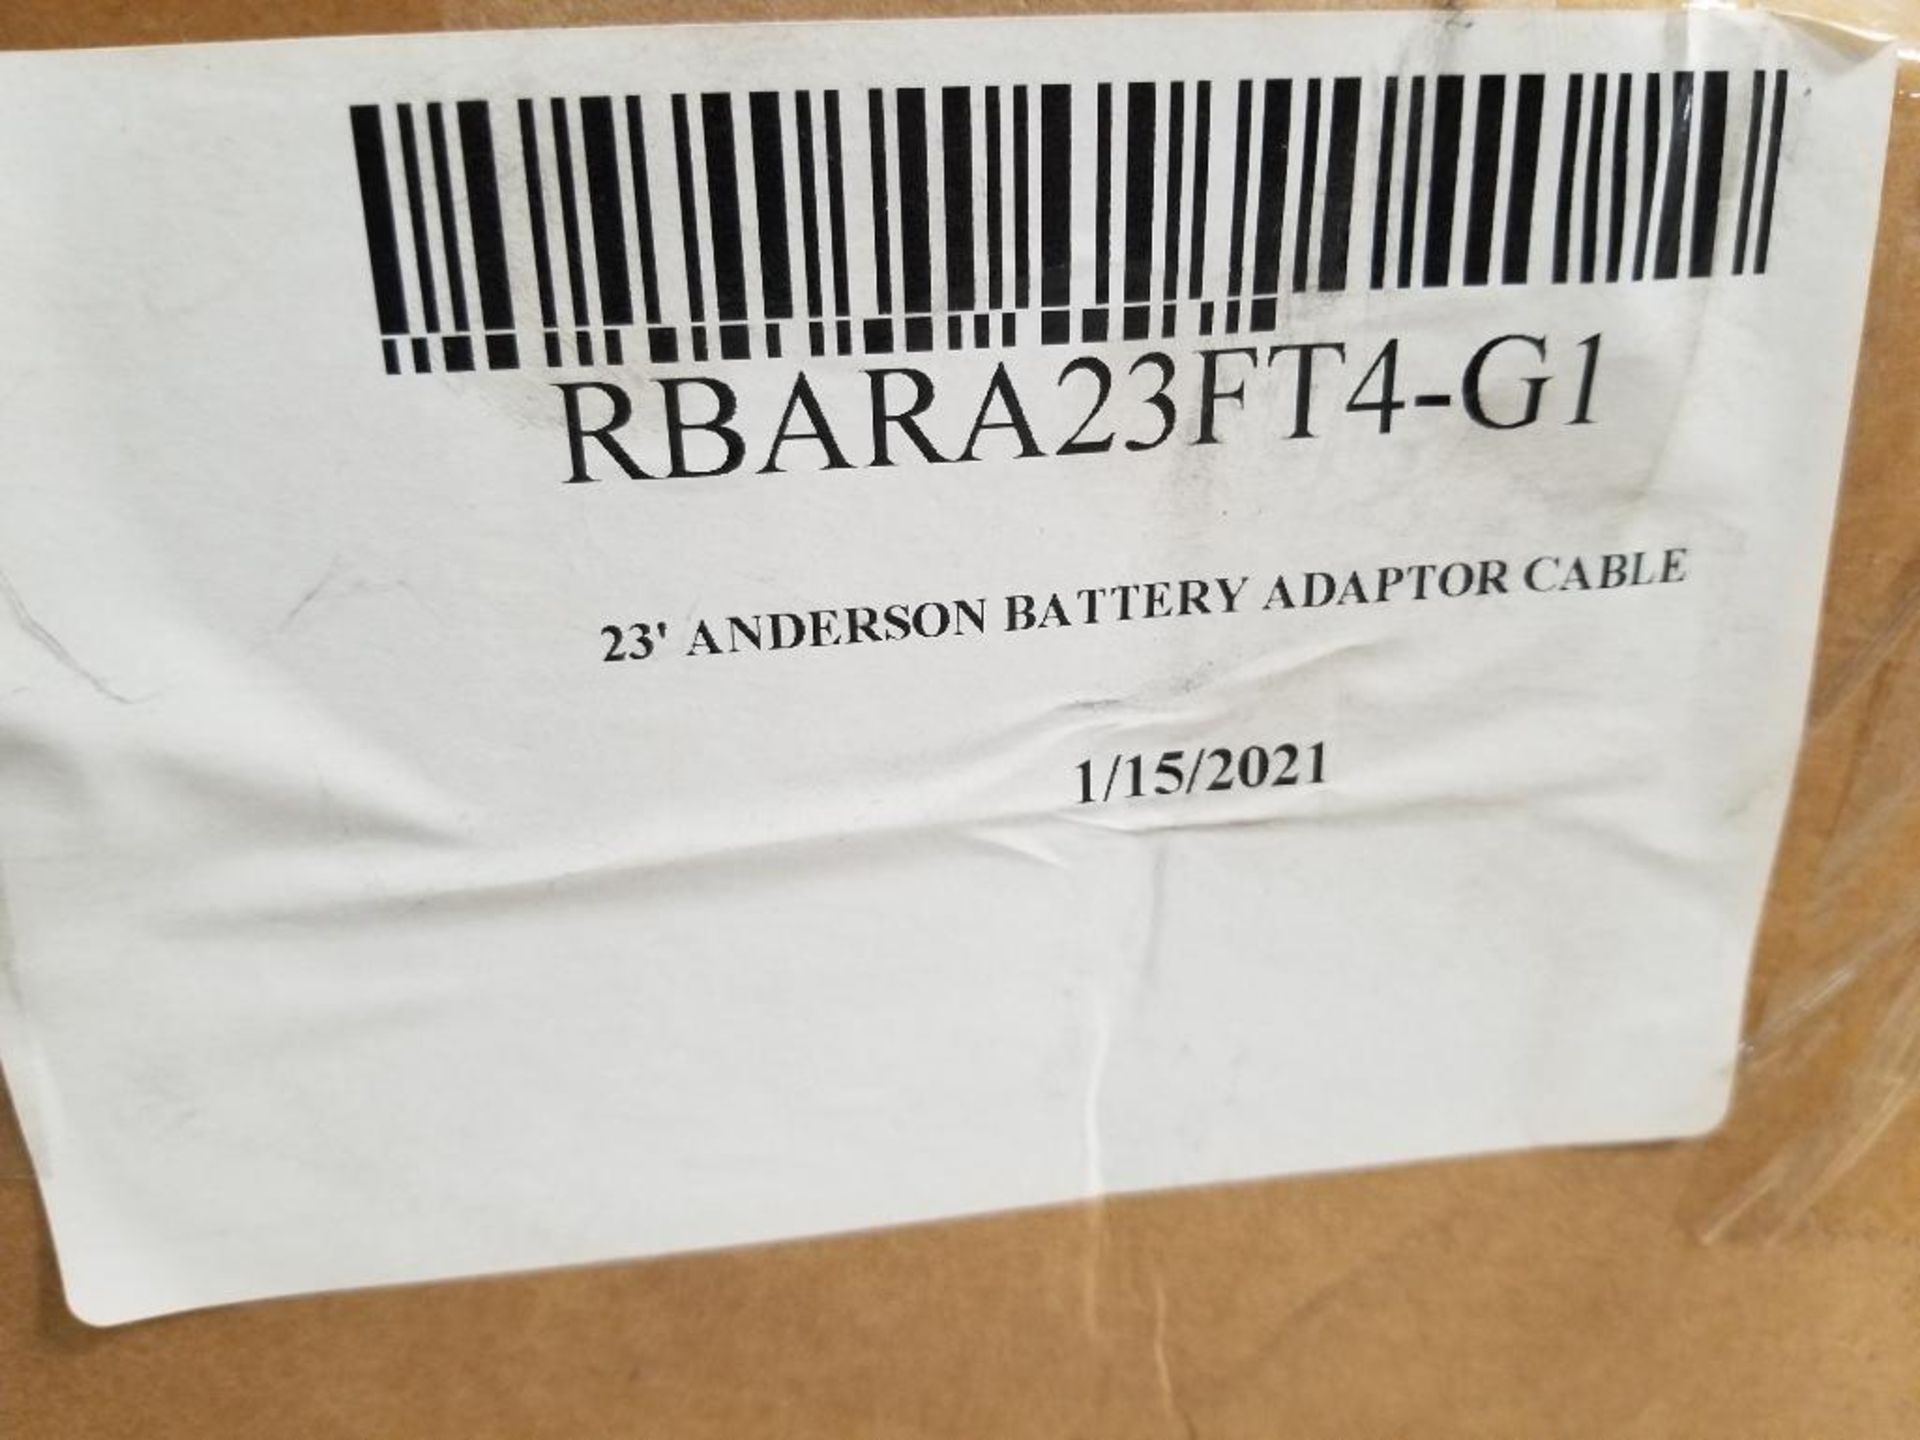 Qty 15 - Anderson 23ft battery adapter cable. RBARA23FT4-G1. 175A, 600V plug. New in box. - Image 3 of 5